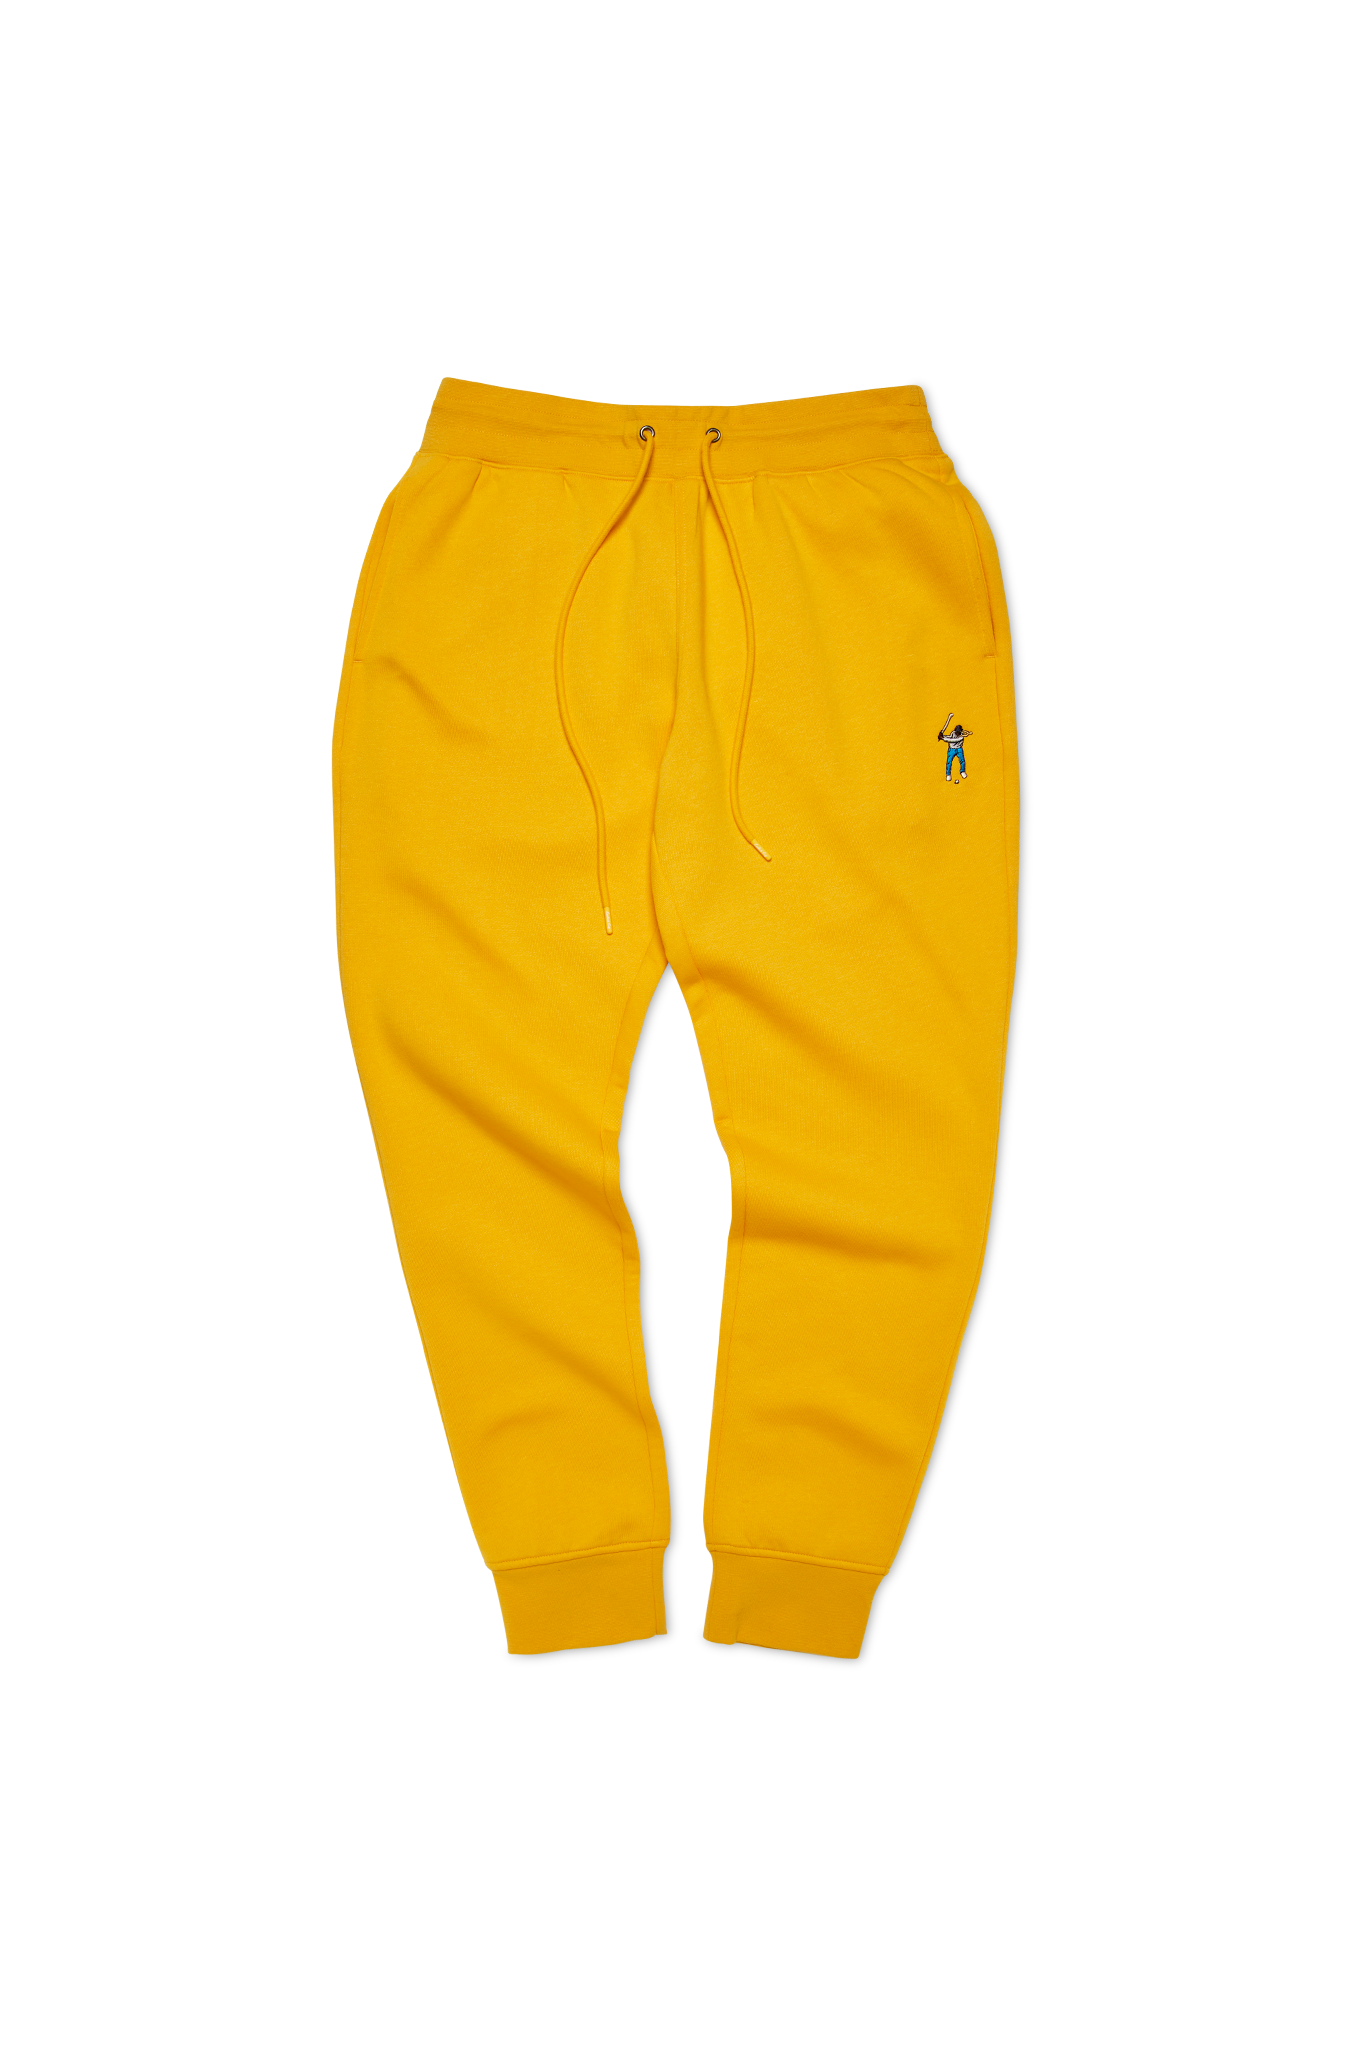 Hard Tail Forever OLD SCHOOL GOLD SPATTER JOGGER Sweatpants